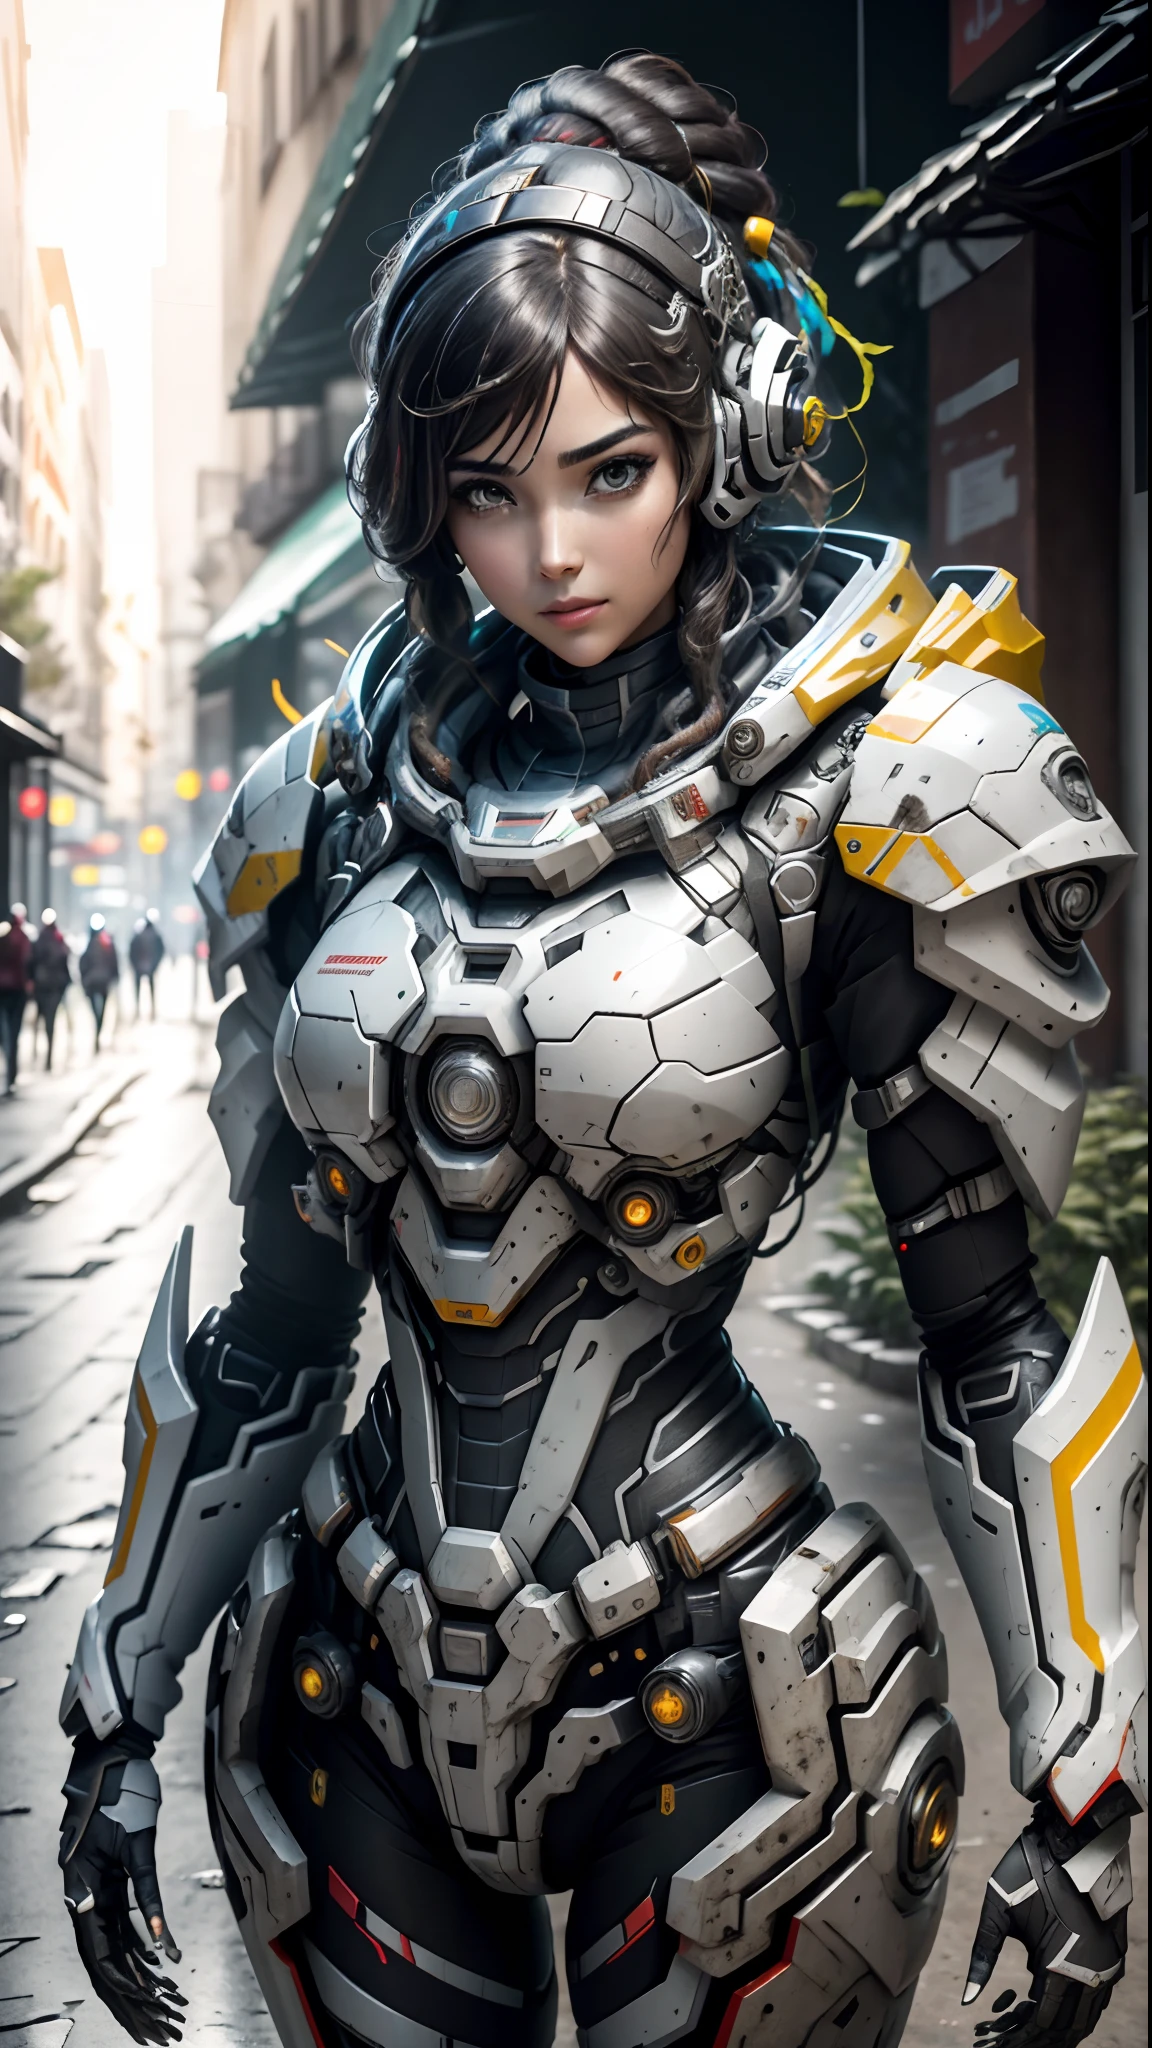 ((Best Quality)), ((Masterpiece)), (Very detailed: 1.3), ....3D, shitu-mecha, beautiful cyberpunk woman with her fuse in the ruins of the city of a forgotten war, ancient technology, HDR (High Dymanic Range), ray tracing, NVIDIA RTX, super resolution, Unreal 5, Sub-Surface Scatterring, Textured PBR, post-processing, Anisotropic filtering, depth of field, Maximum clarity and sharpness, Multilayer textures, albedo and specular maps, surface shading, Accurate simulation of light-material interaction, perfect proportions, rendered octane, two tone lighting, Low ISO, white balance, rule of thirds, wide opening, 8K RAW, Efficient Sub-Pixel, sub-pixel convolution, Luminescent Particles, Light scattering, Tyndall effect